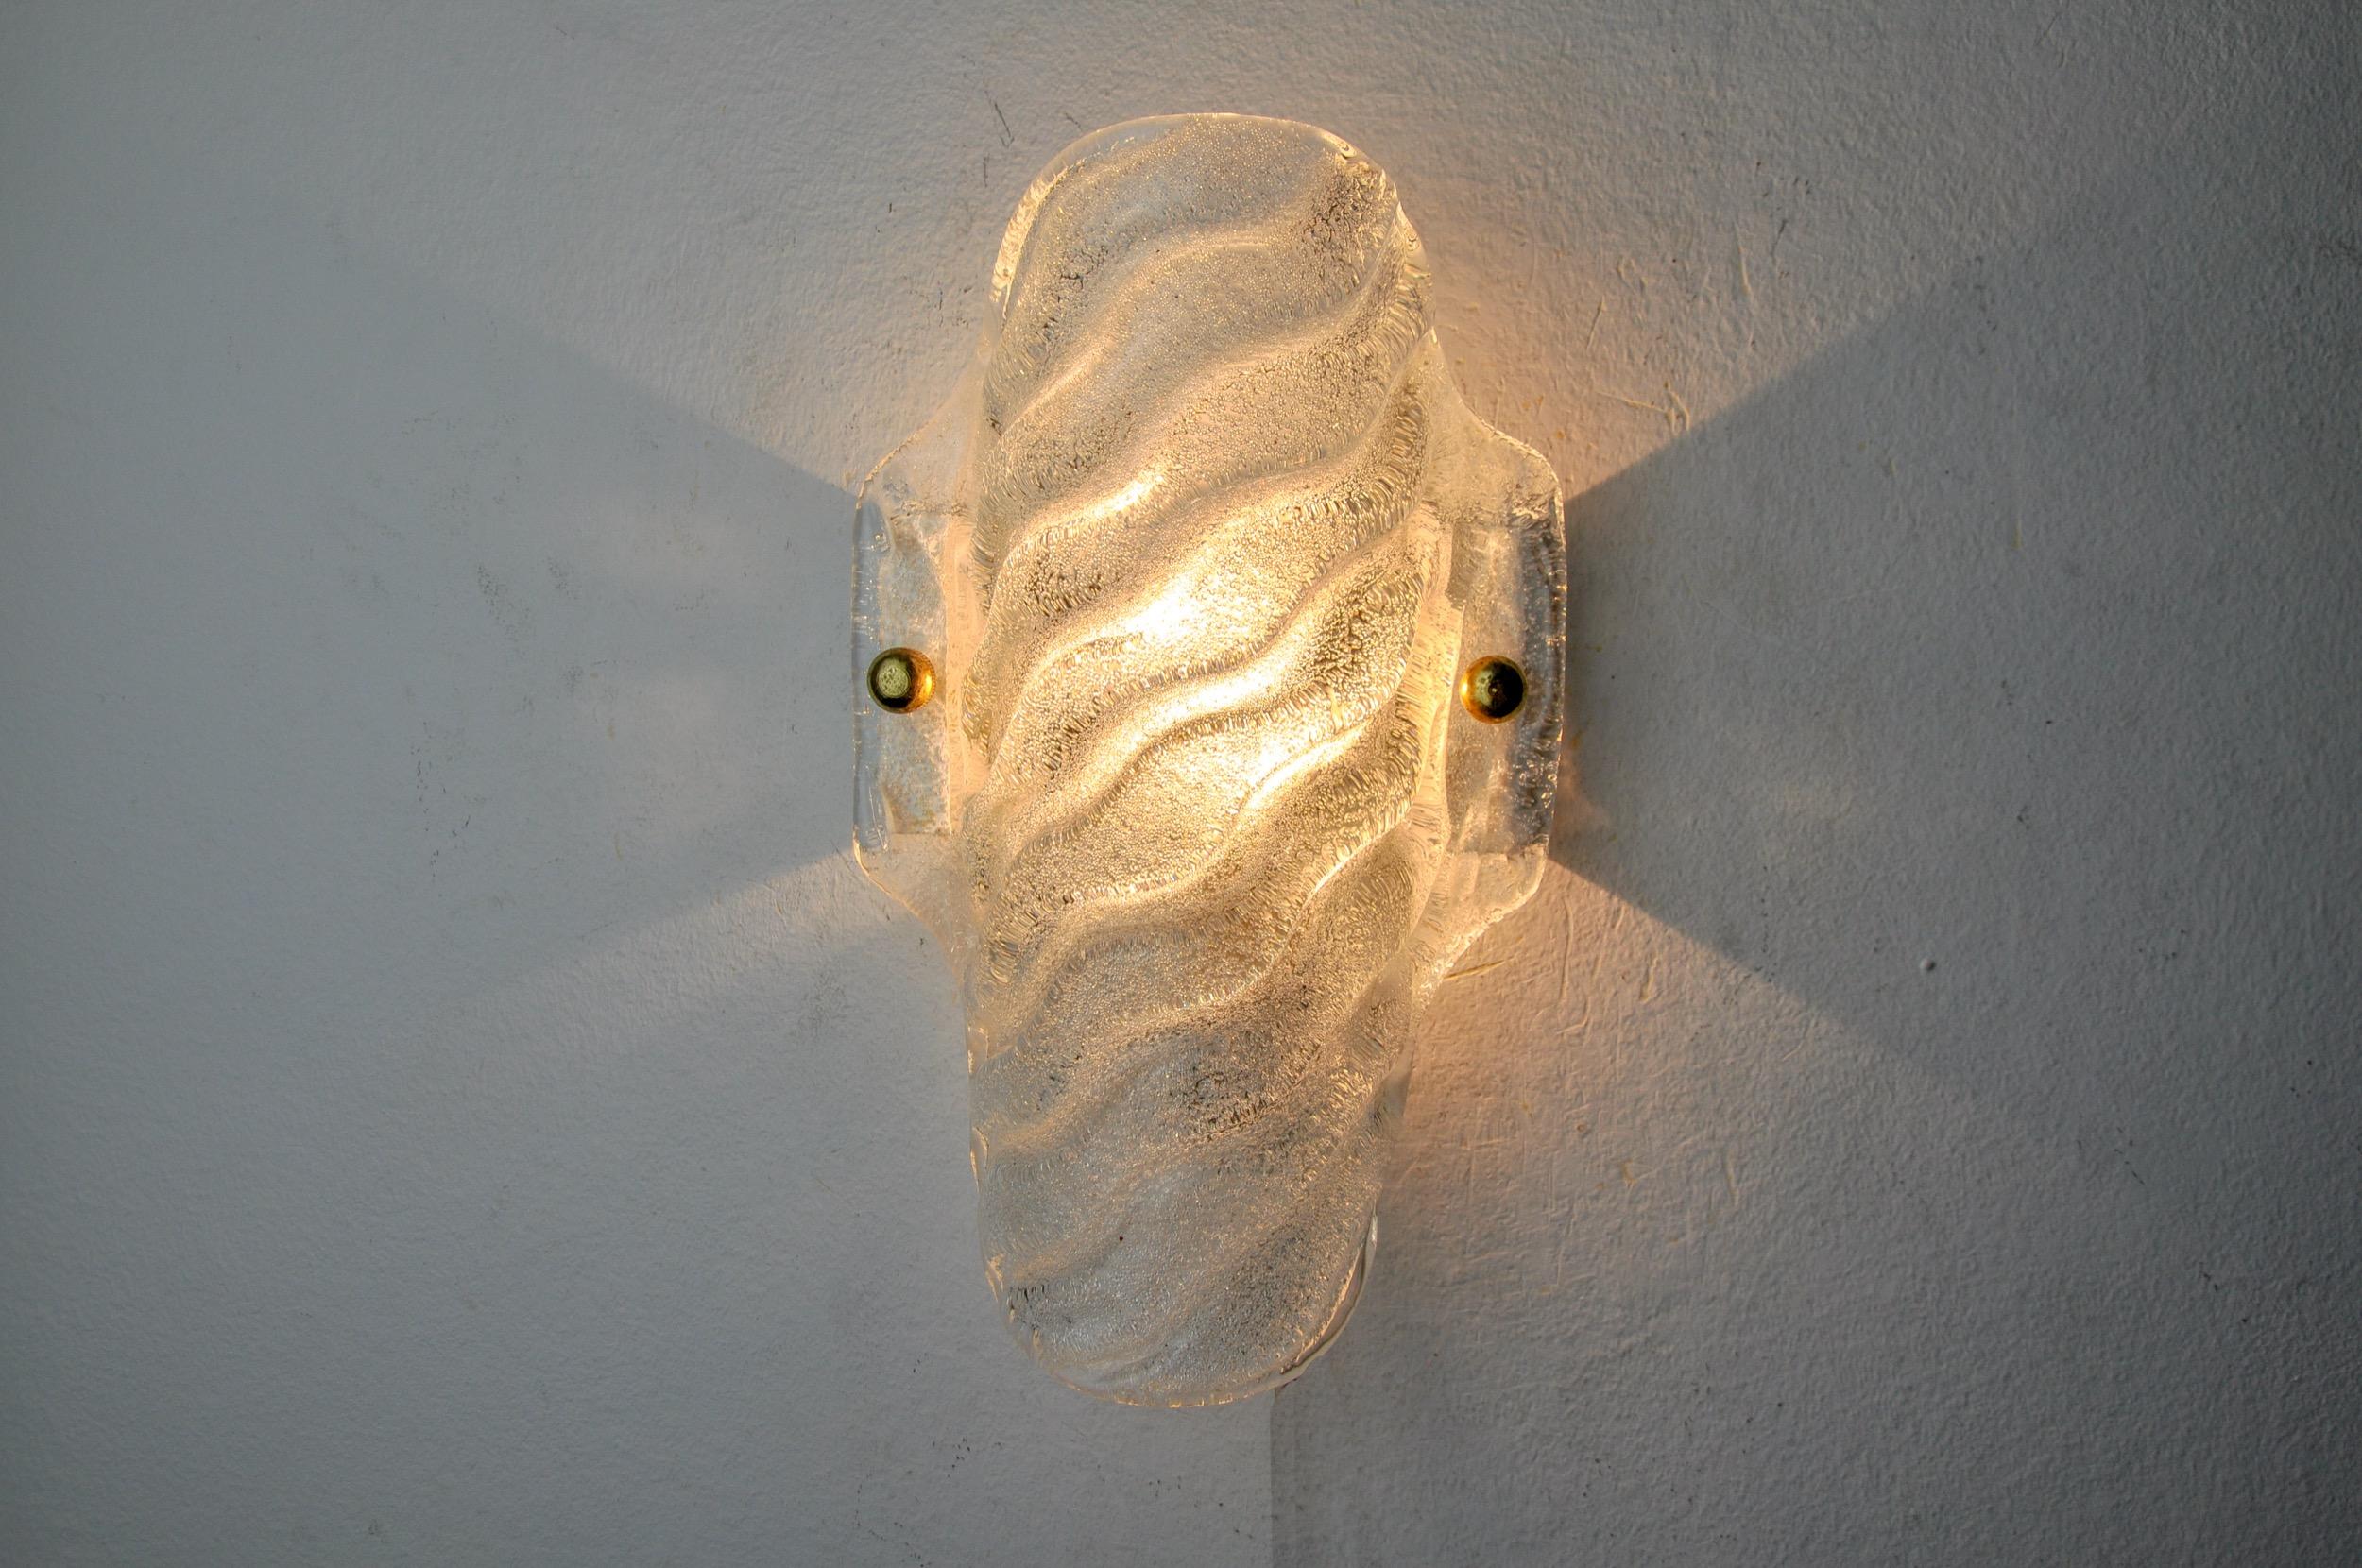 Superb wall lamp in frosted glass designated and produced in italy in the 70s. White frosted murano glass supported by a white metal structure. The diffused light is soft and harmonious perfect to illuminate your interior. Time mark consistent with